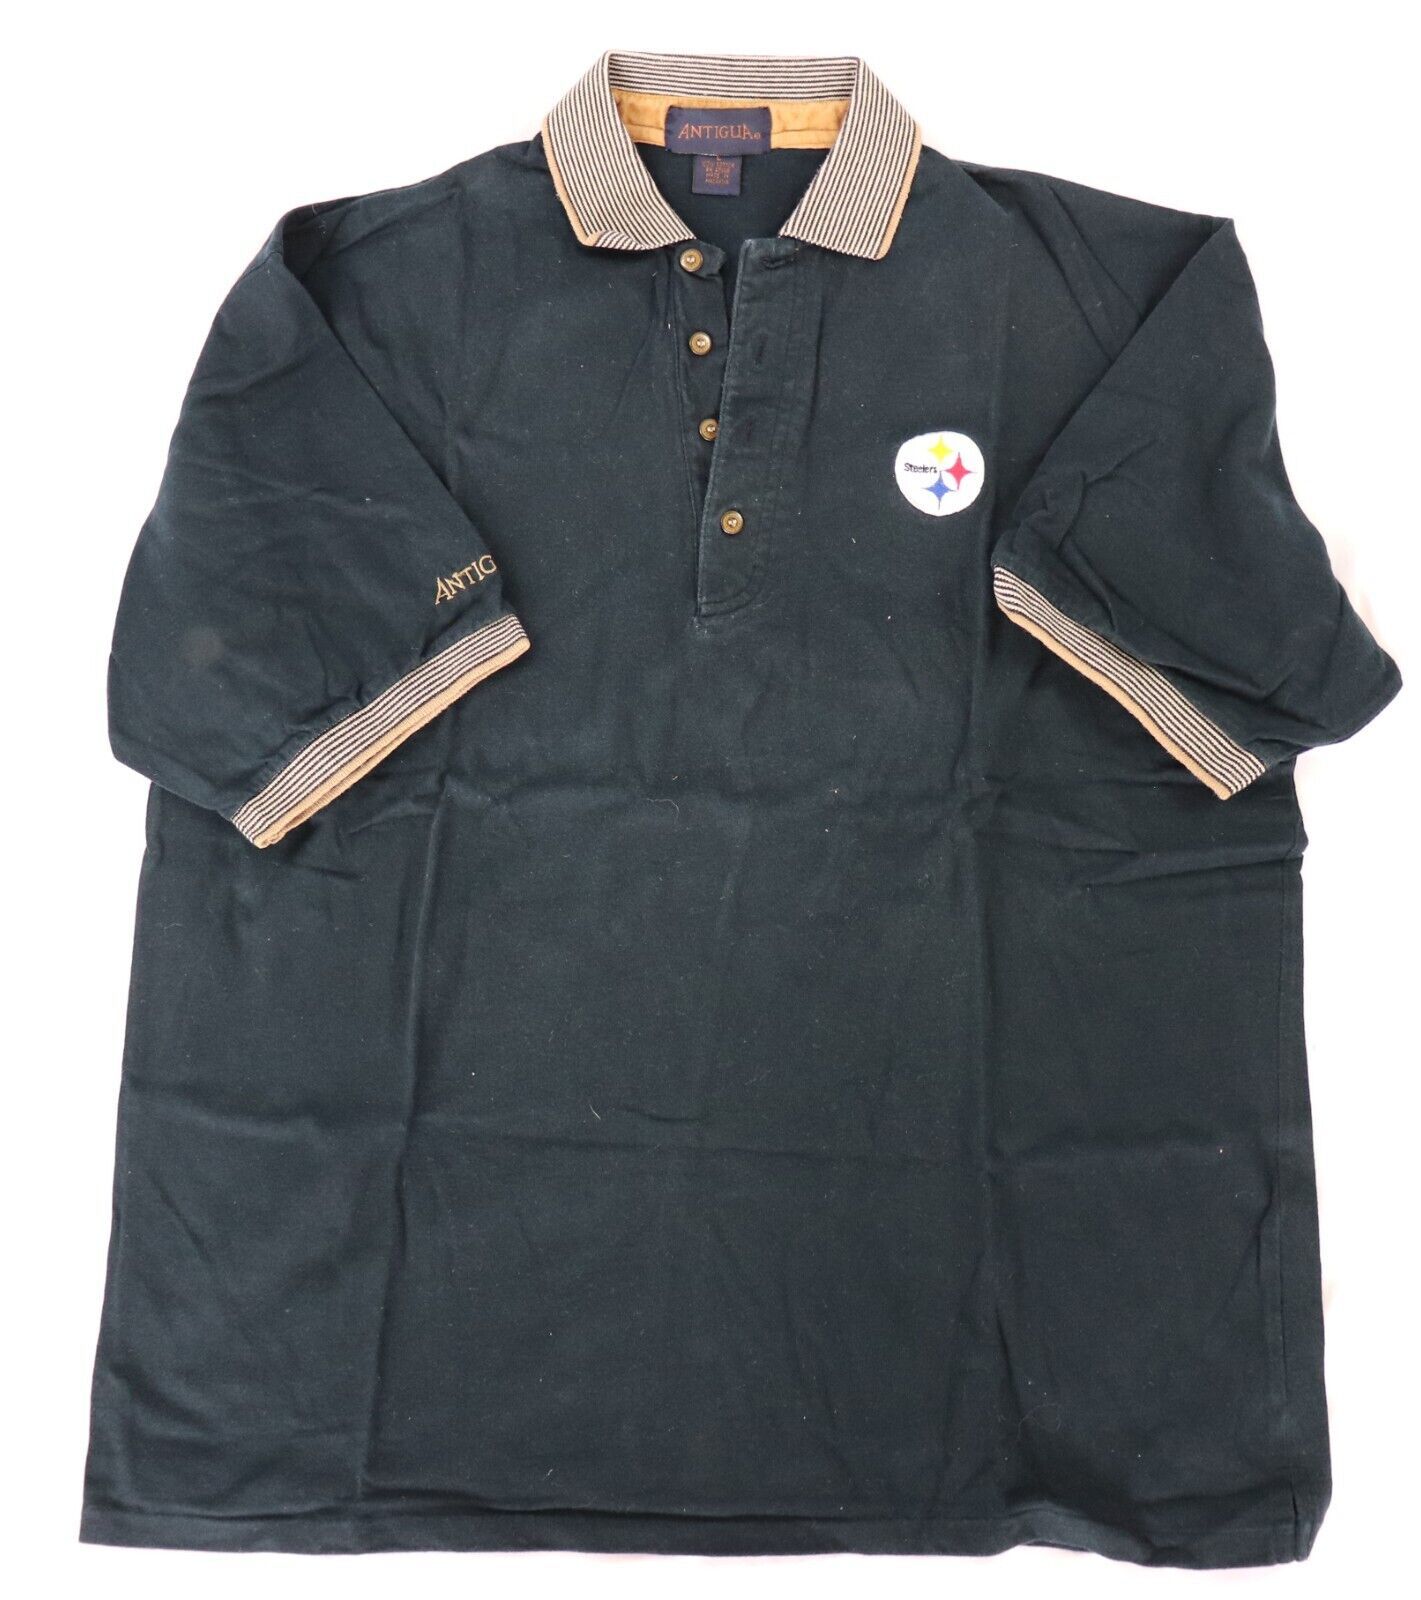 NEW w/o Tags VINTAGE 1990s Pittsburgh Steelers Antigua Golf Shirt Large LG L - $49.49